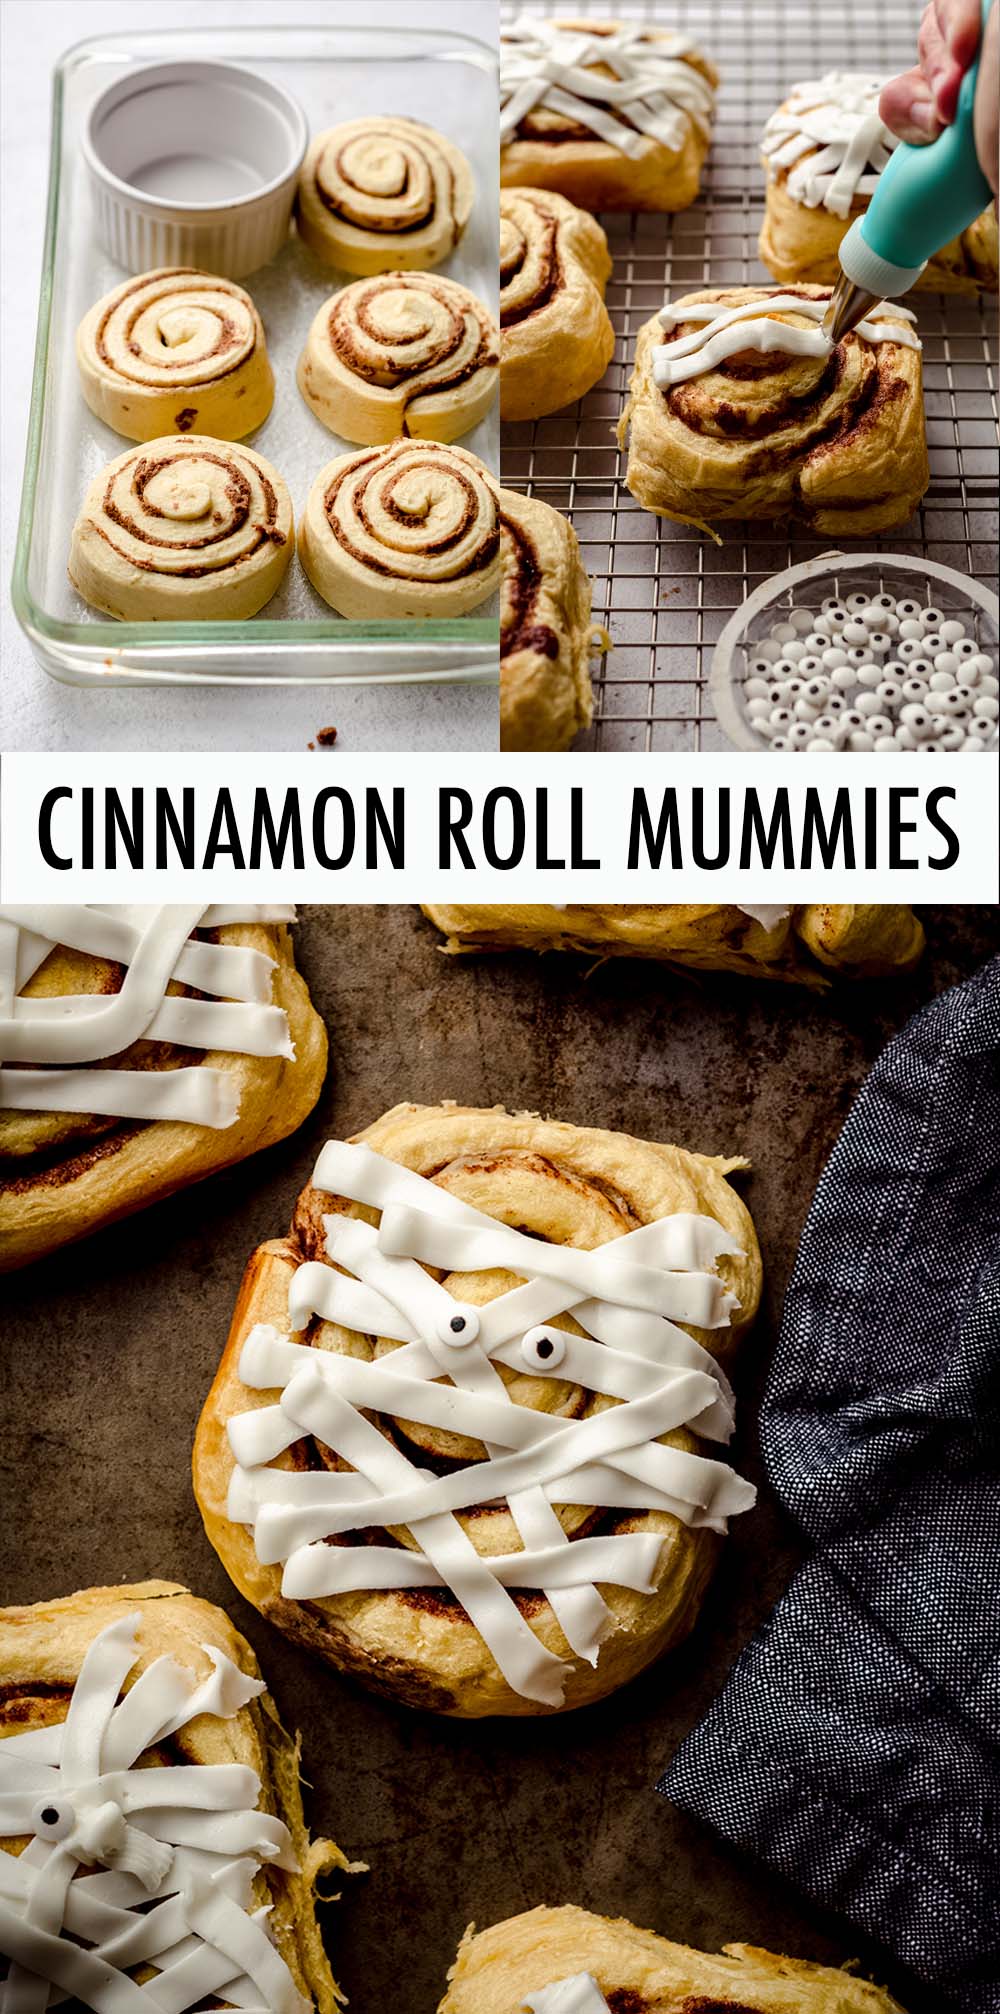 Turn Halloween breakfast into a spooky surprise! Use pre-made cinnamon rolls and icing and candy eyeballs to turn traditional buns into mummies for a fun Halloween treat. Instructions included for making rolls and icing from scratch, if you prefer. via @frshaprilflours